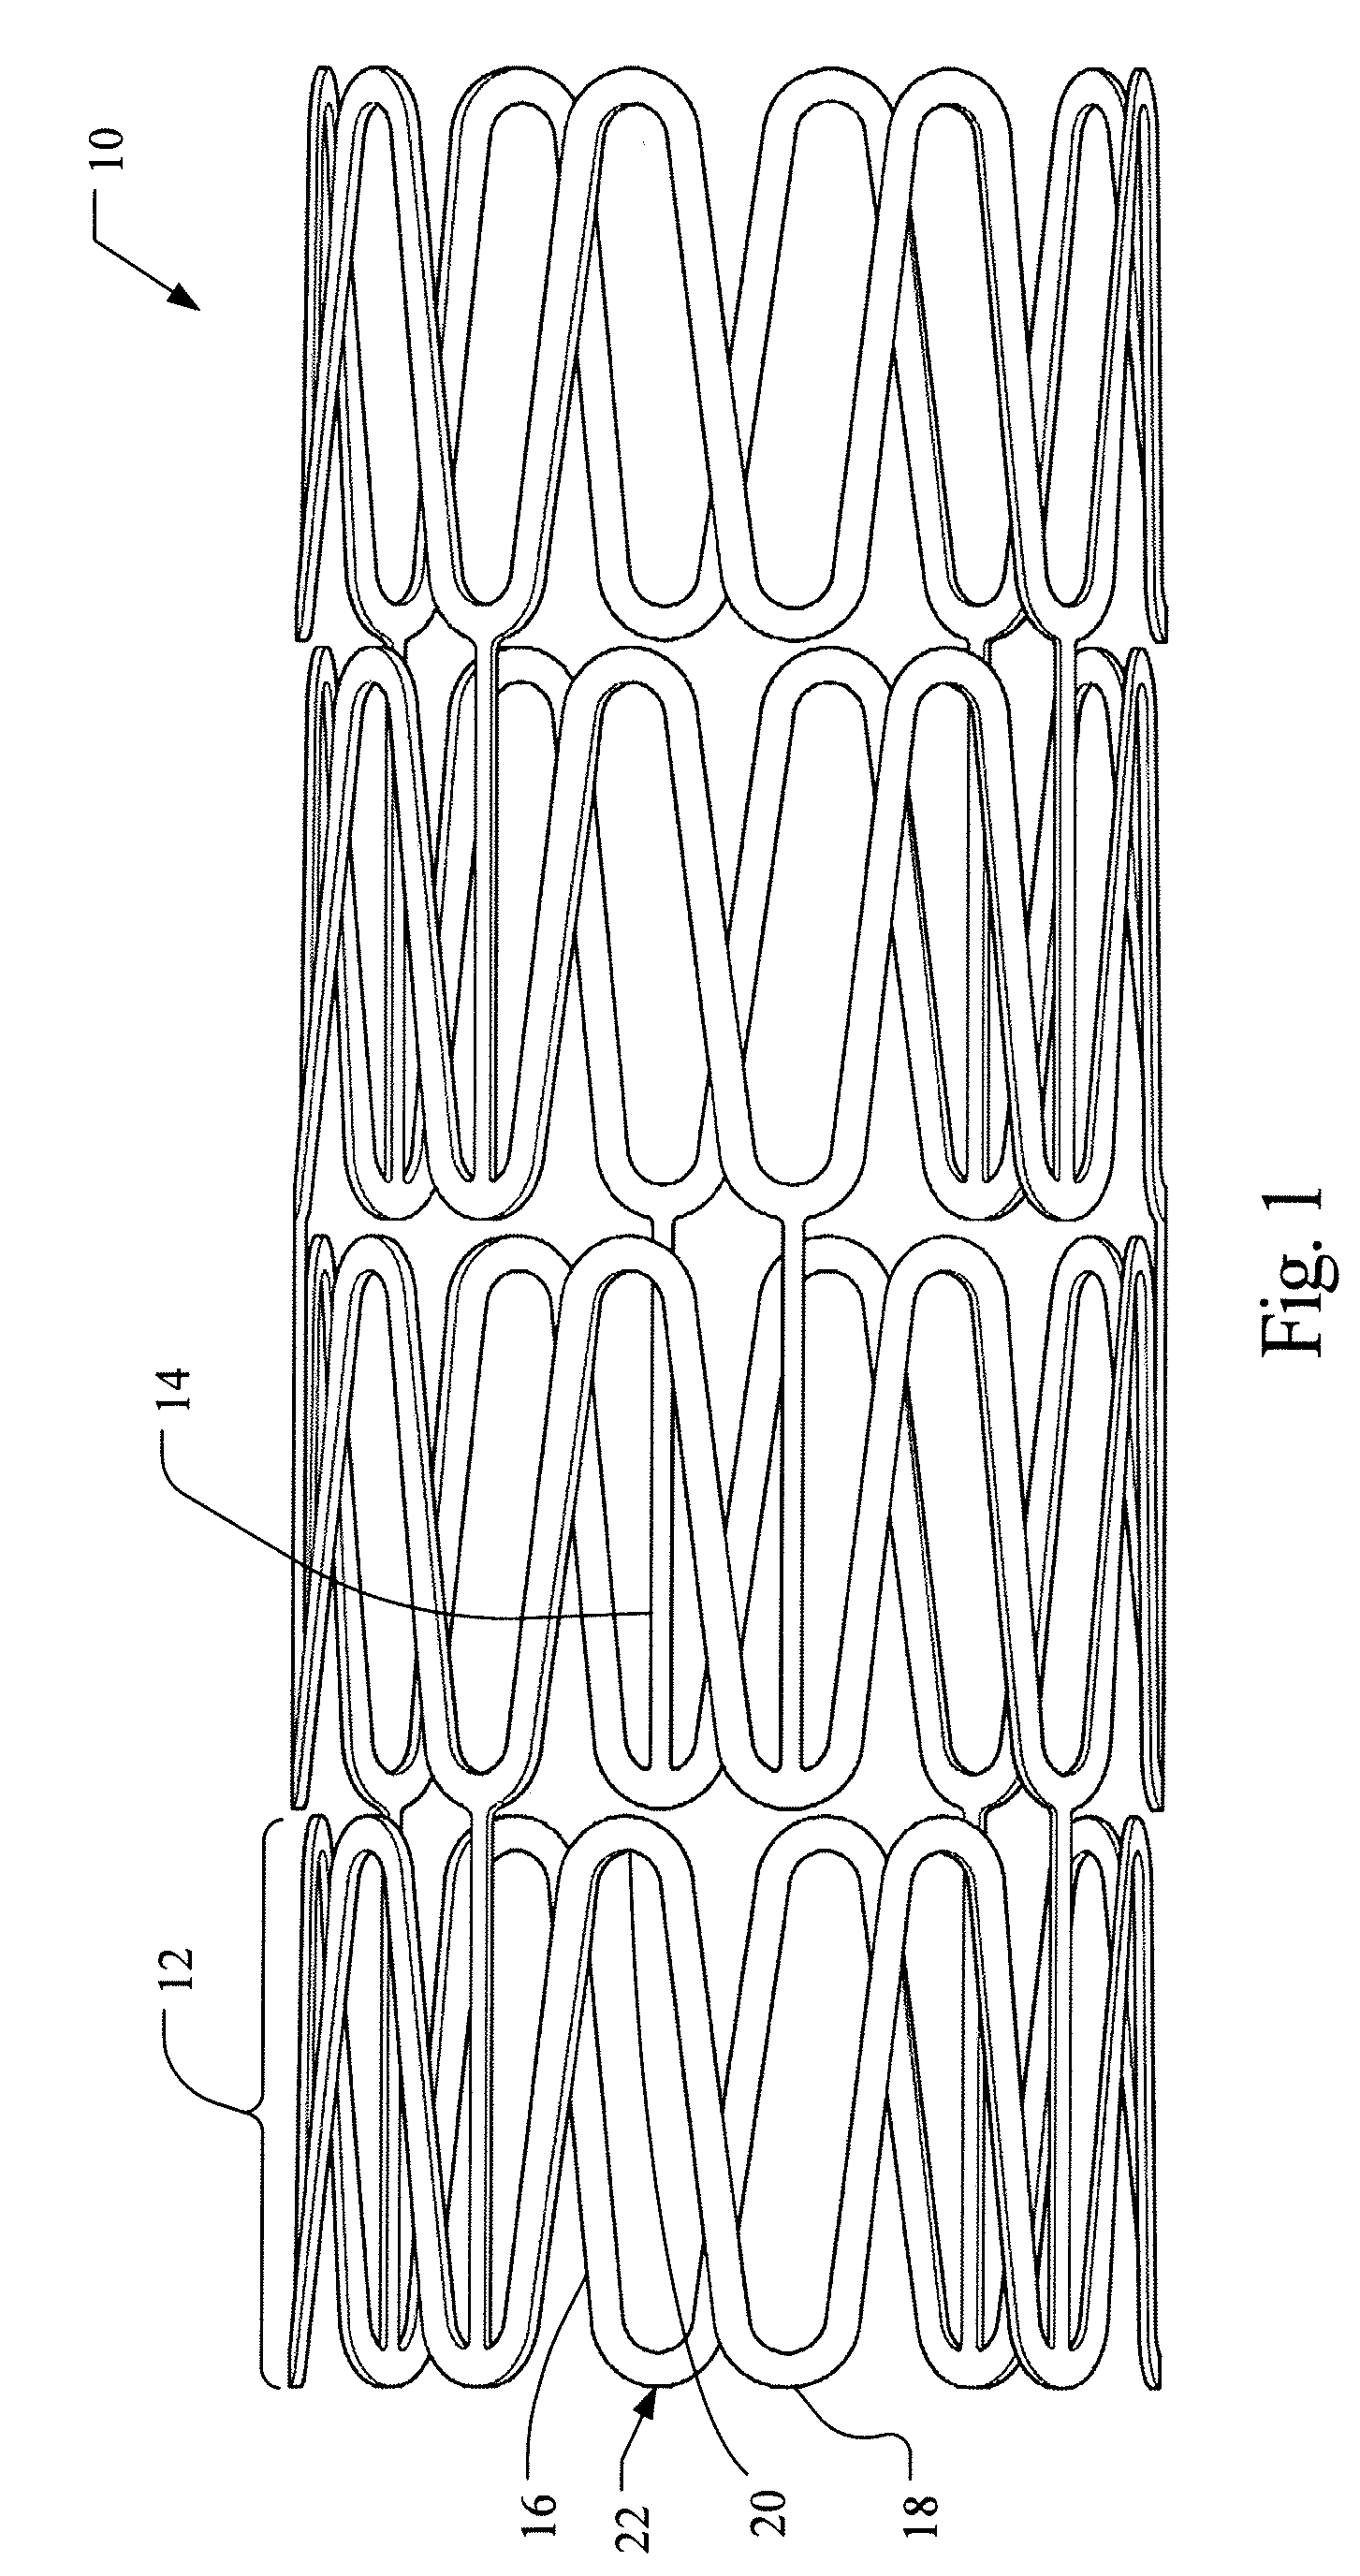 Covered balloon expandable stent design and method of covering